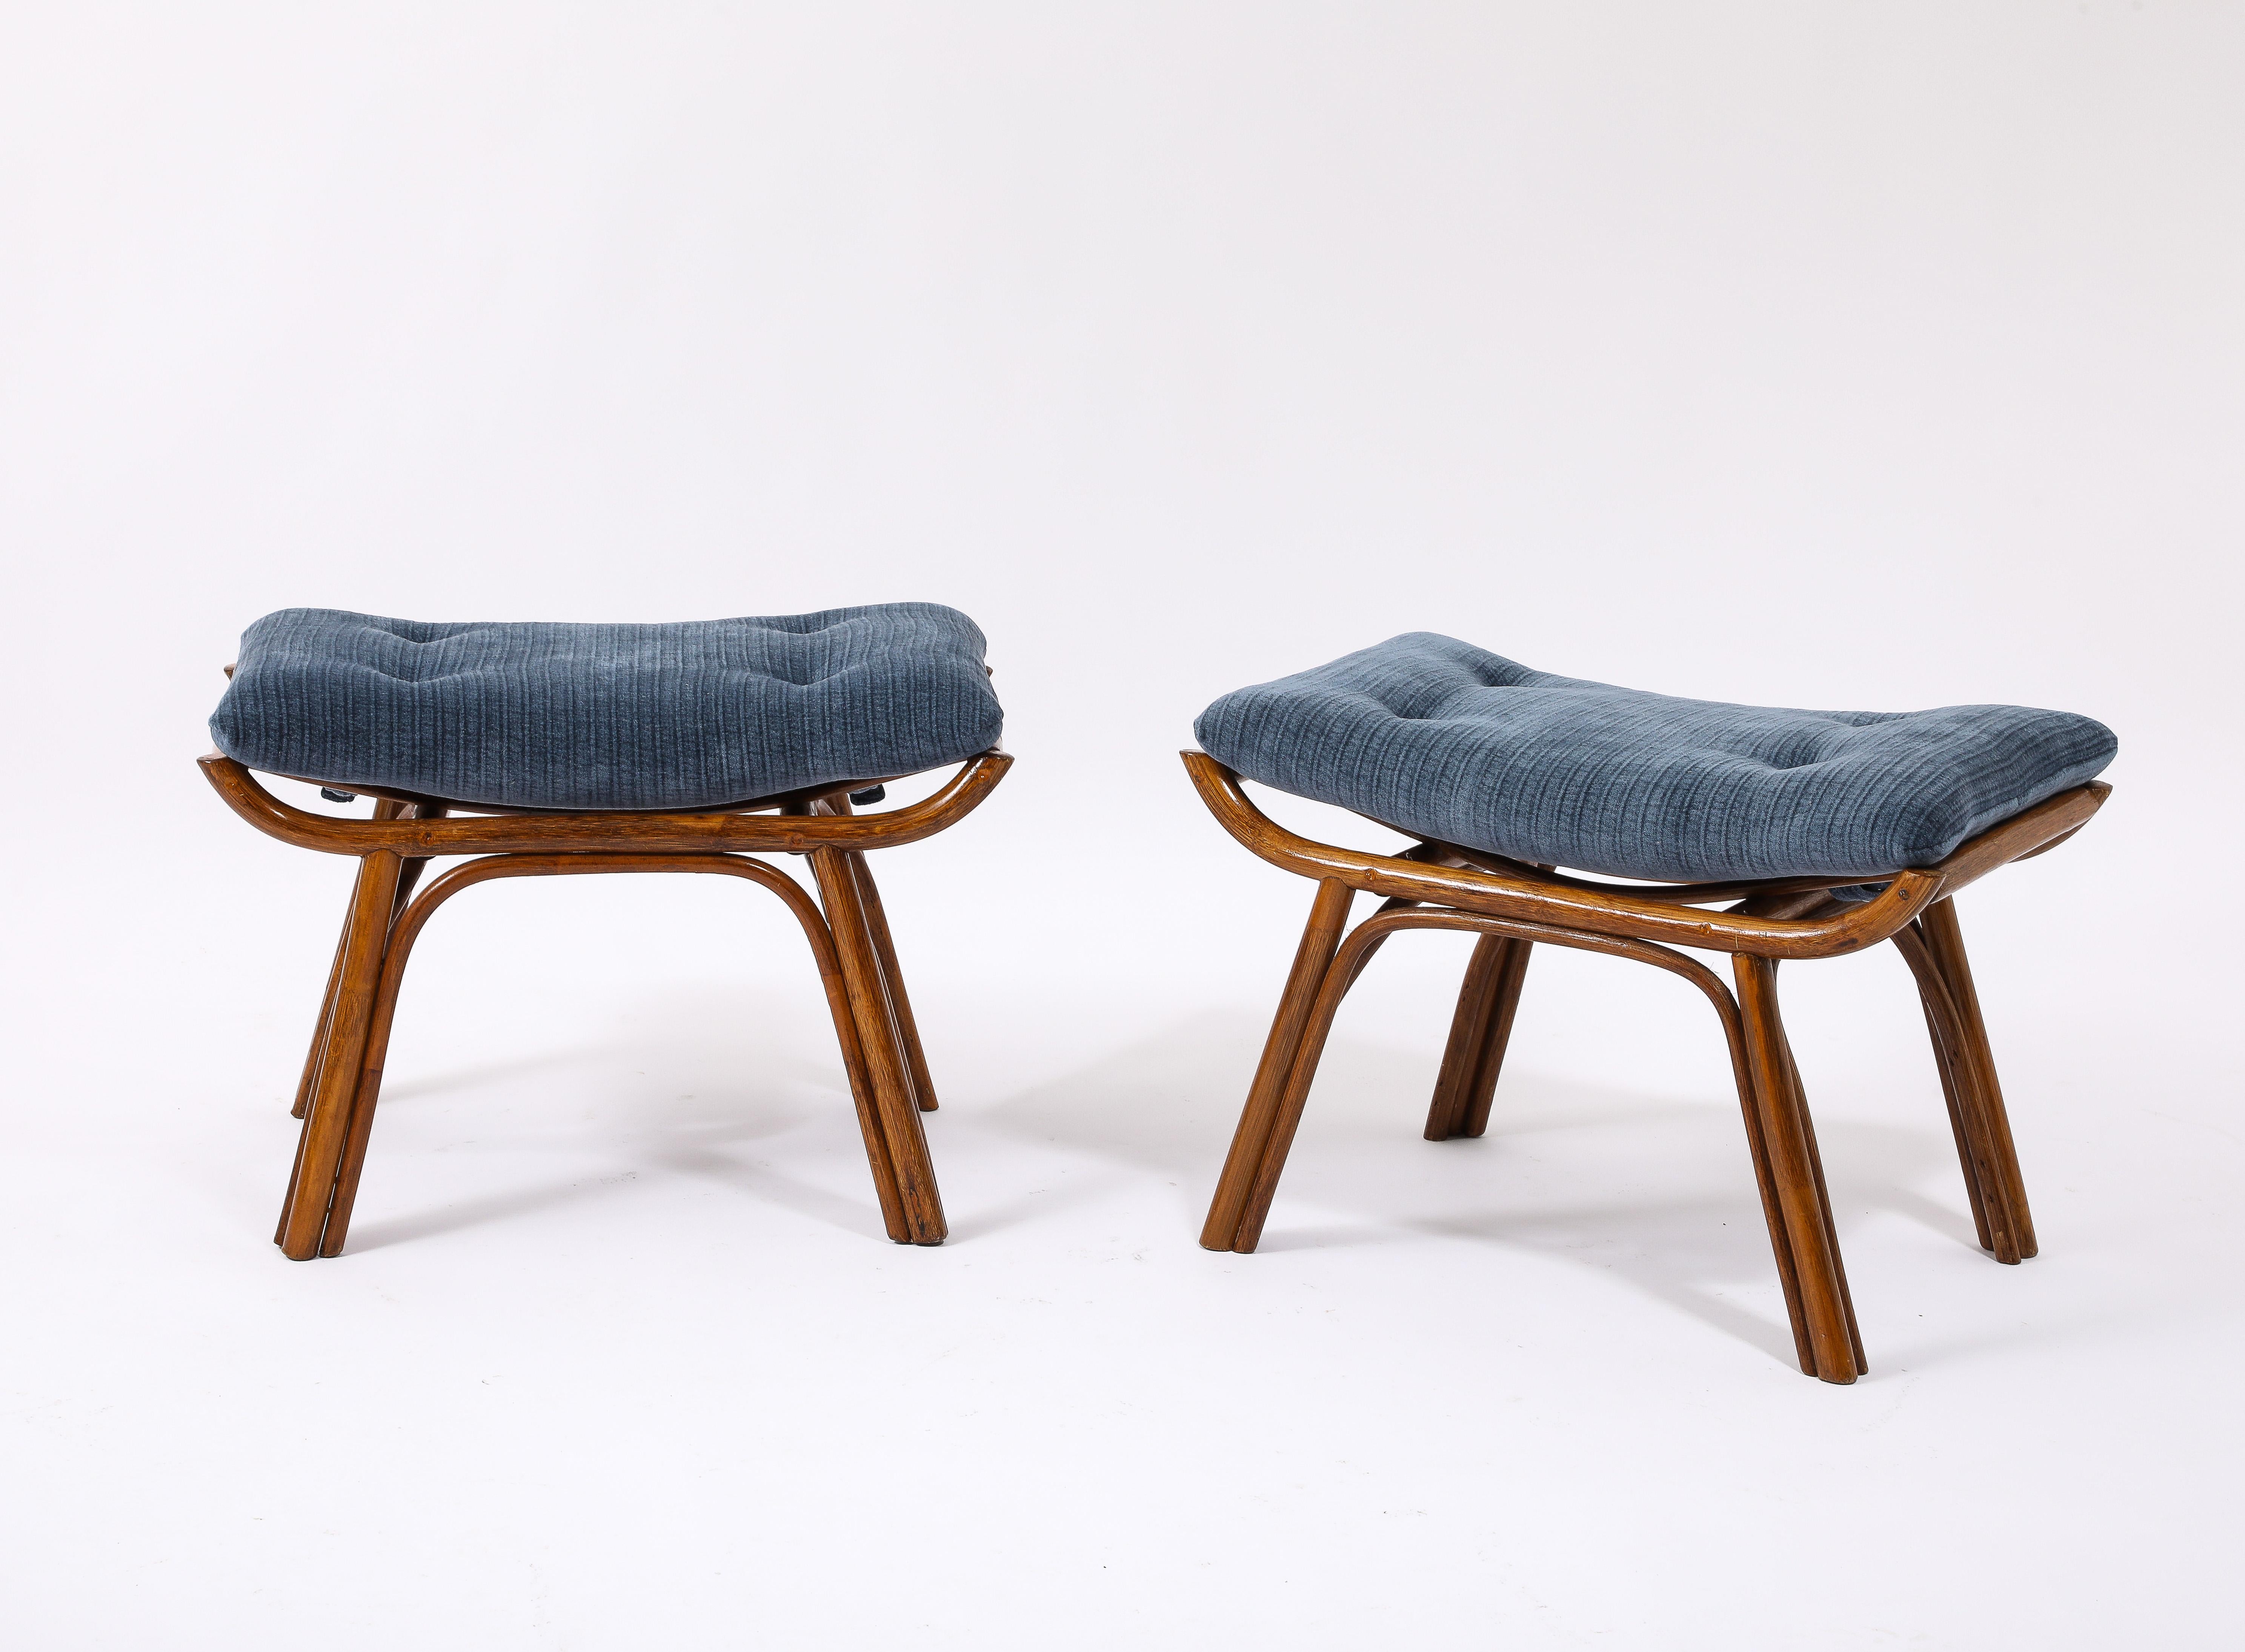 Curved Bamboo Stools in Blue Mohair, France 1950's For Sale 5